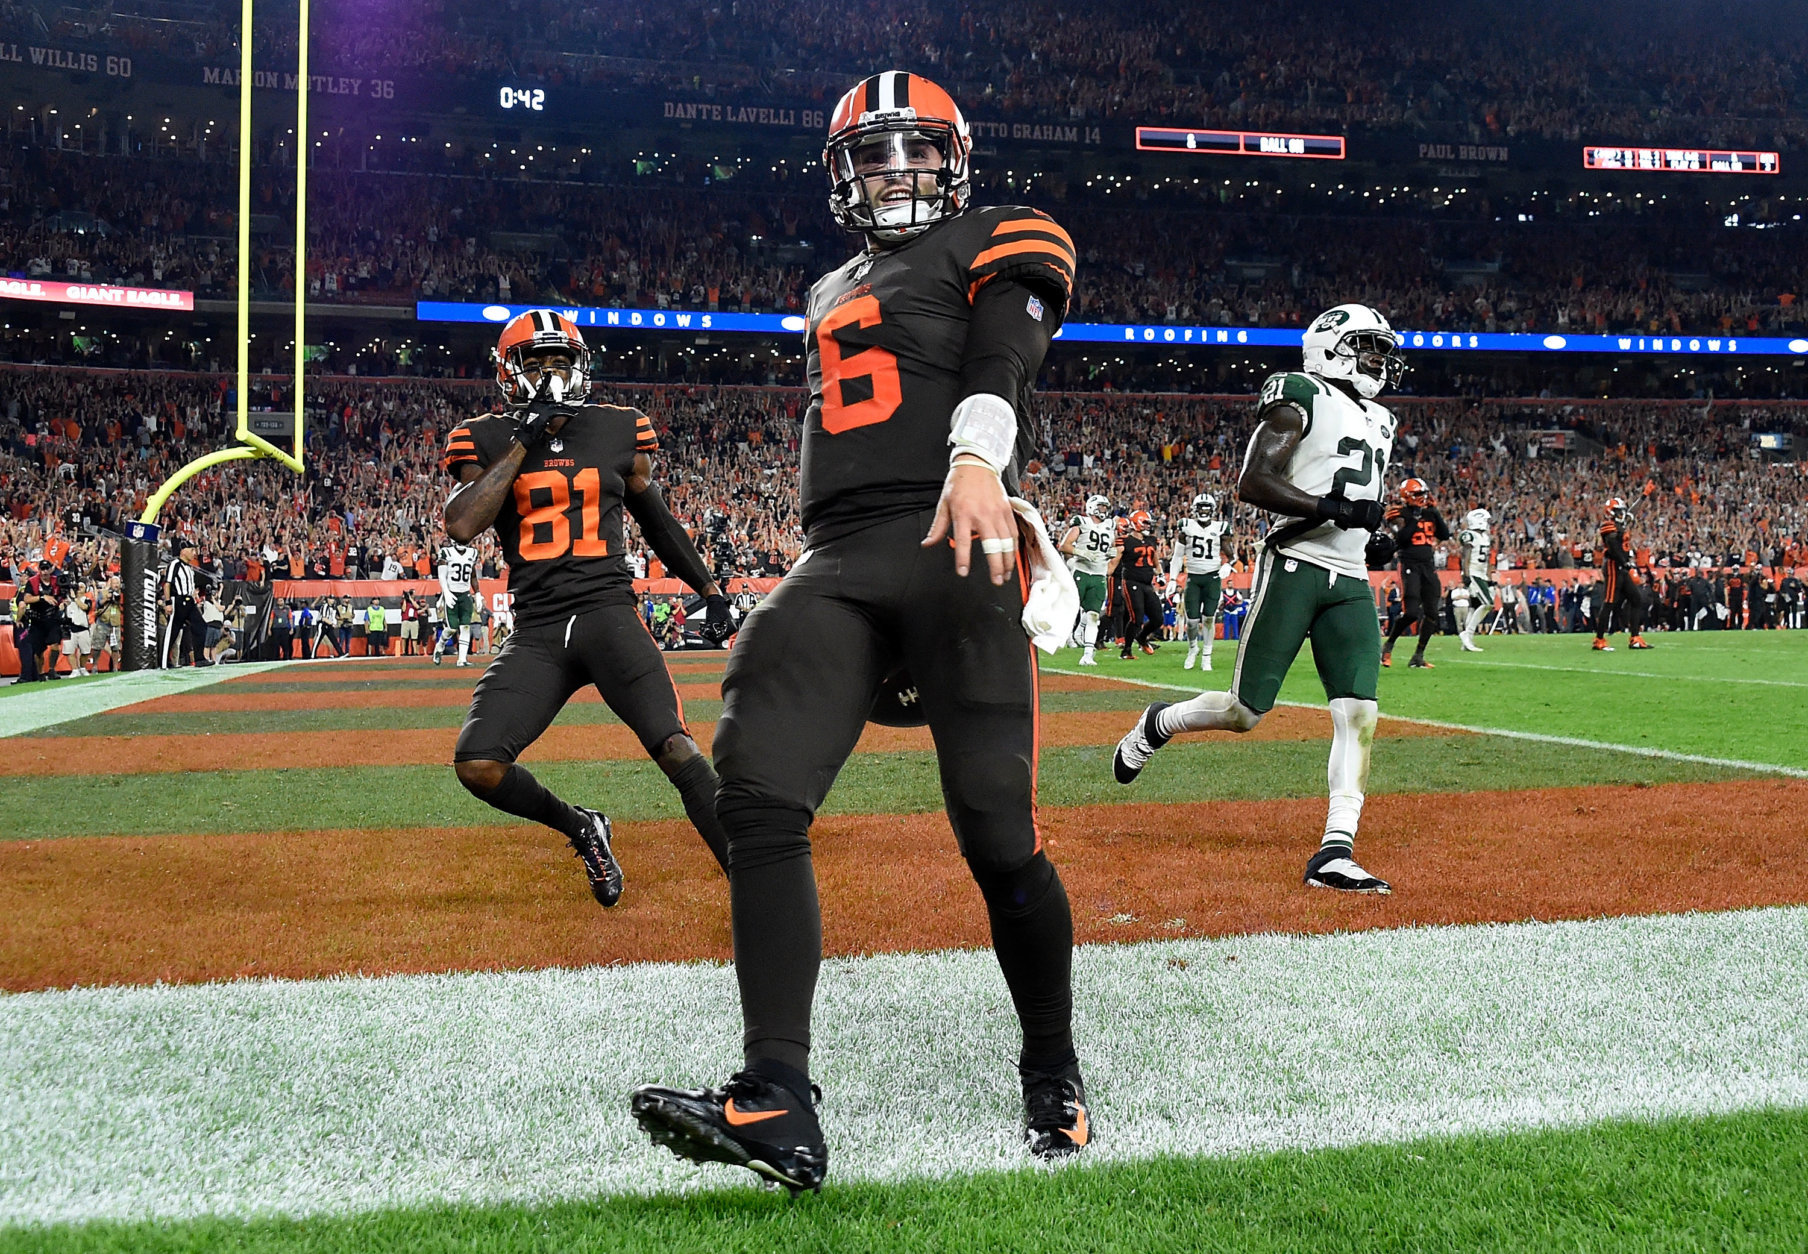 CLEVELAND, OH - SEPTEMBER 20:  Baker Mayfield #6 of the Cleveland Browns celebrates after making a catch on a two-point conversion attempt during the third quarter against the New York Jets at FirstEnergy Stadium on September 20, 2018 in Cleveland, Ohio. (Photo by Jason Miller/Getty Images)